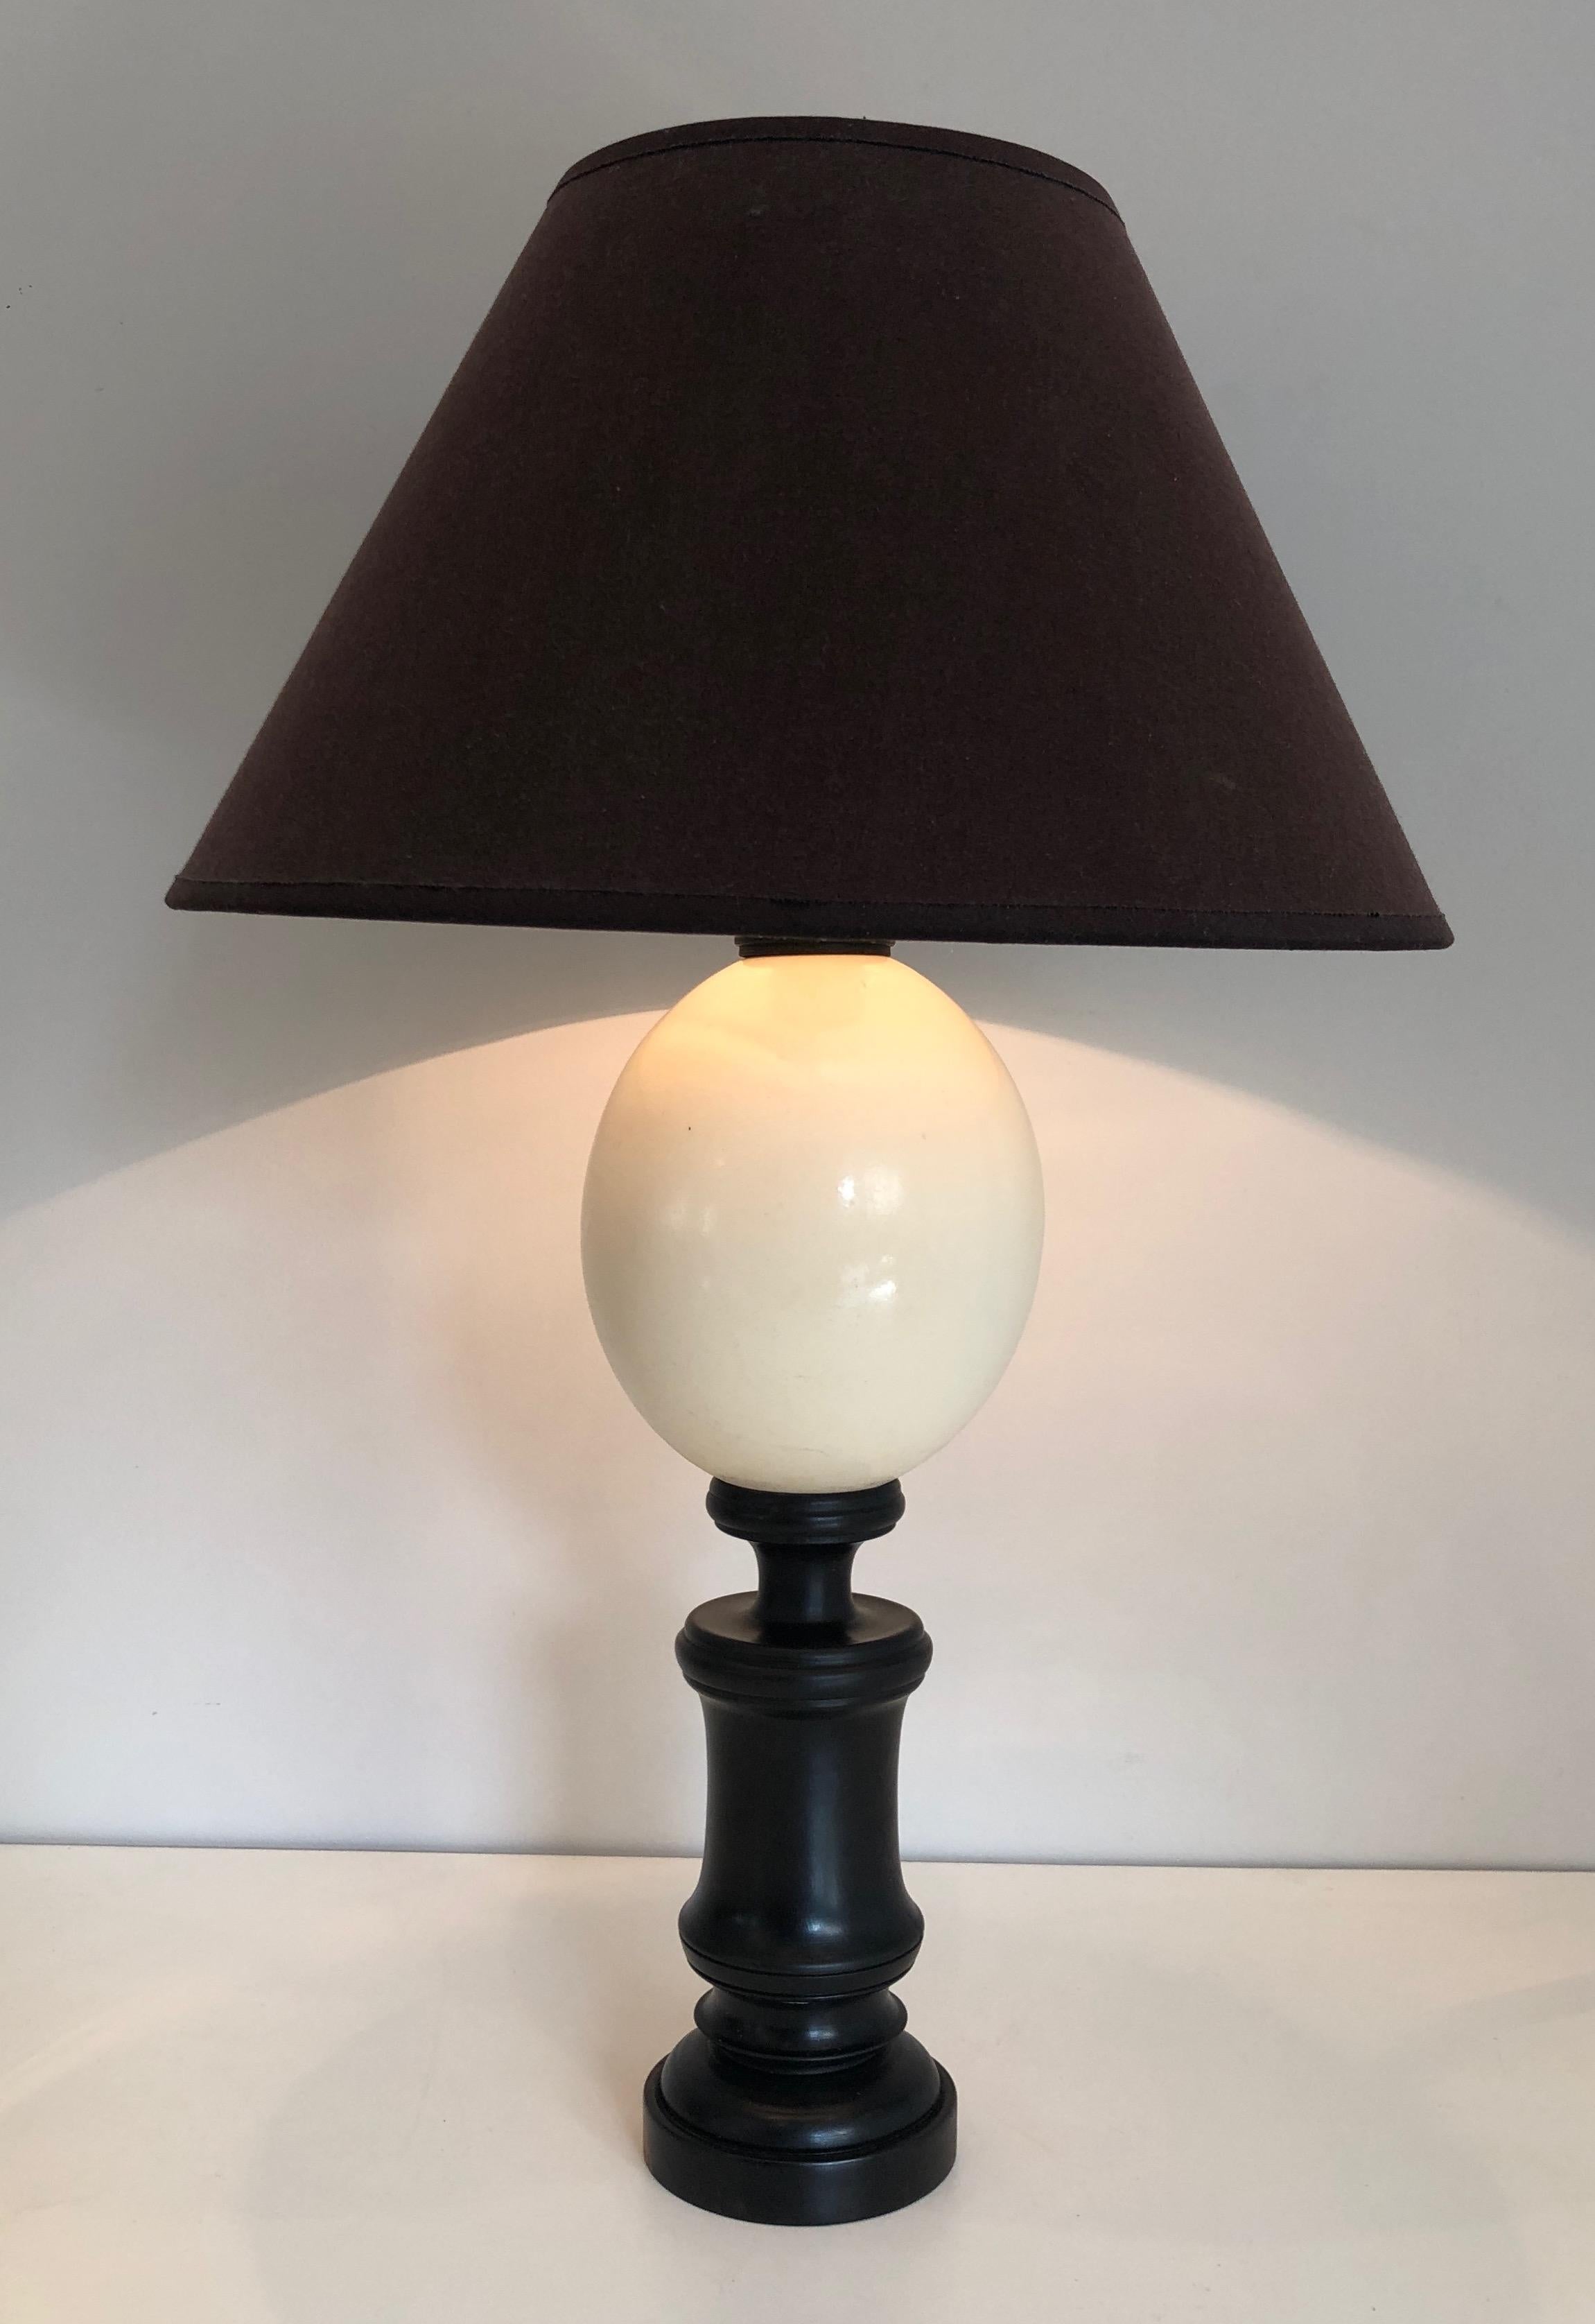 Blackened Wood and Ostrich Eggshell Table Lamp, French Work, Circa 1970 For Sale 5